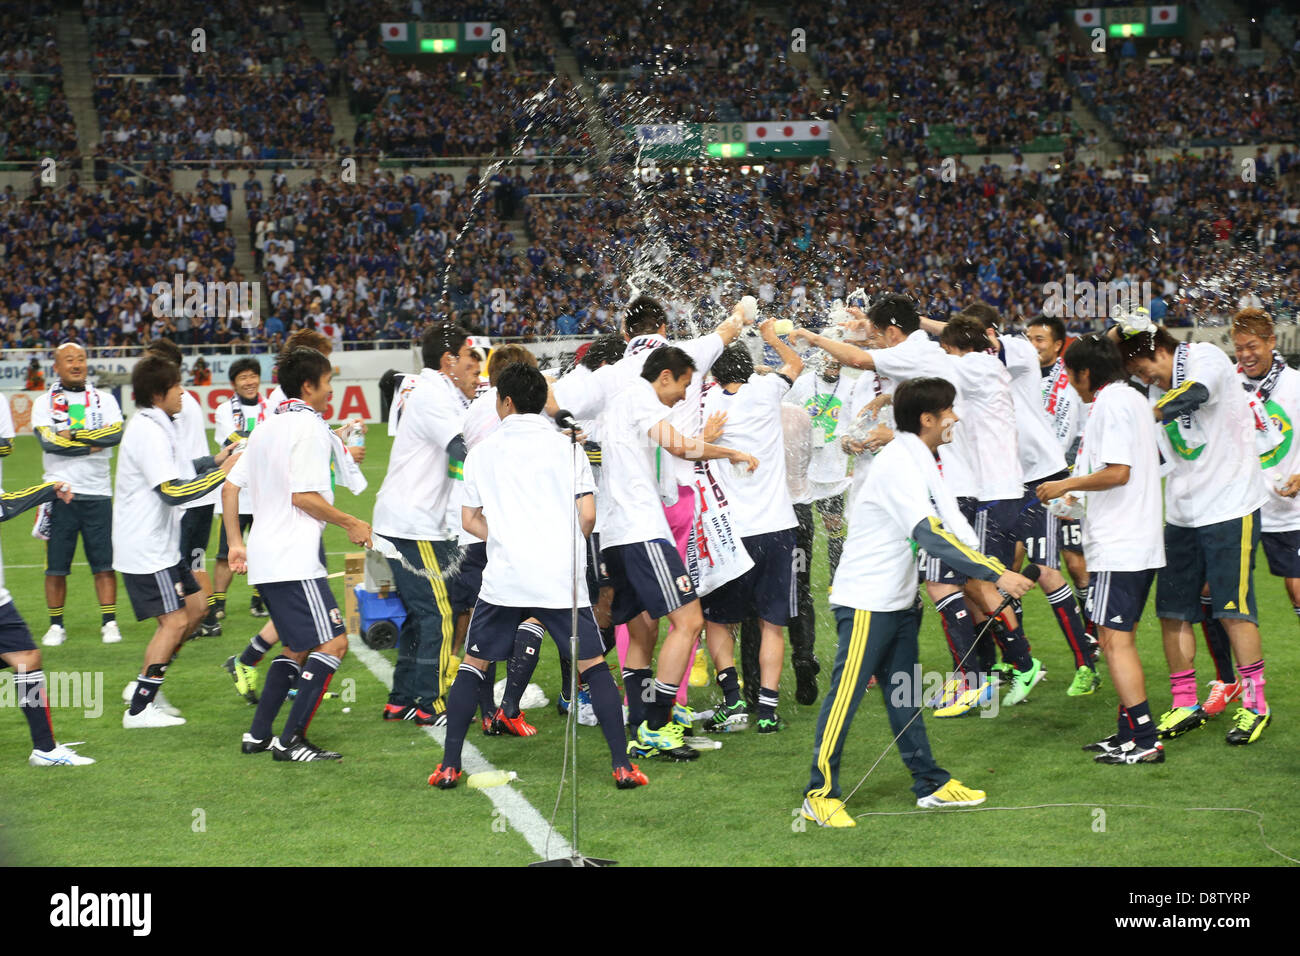 Saitama, Japan. 4th June 2013. Japan's national soccer team celebrate after their FIFA World Cup Brazil 2014 Asian Qualifier Final Round Group B between Japan 1-1 Australia at Saitama Stadium 2002, Saitama, Japan. (Photo by Kenzaburo Matsuoka/AFLO/Alamy Live News) Stock Photo